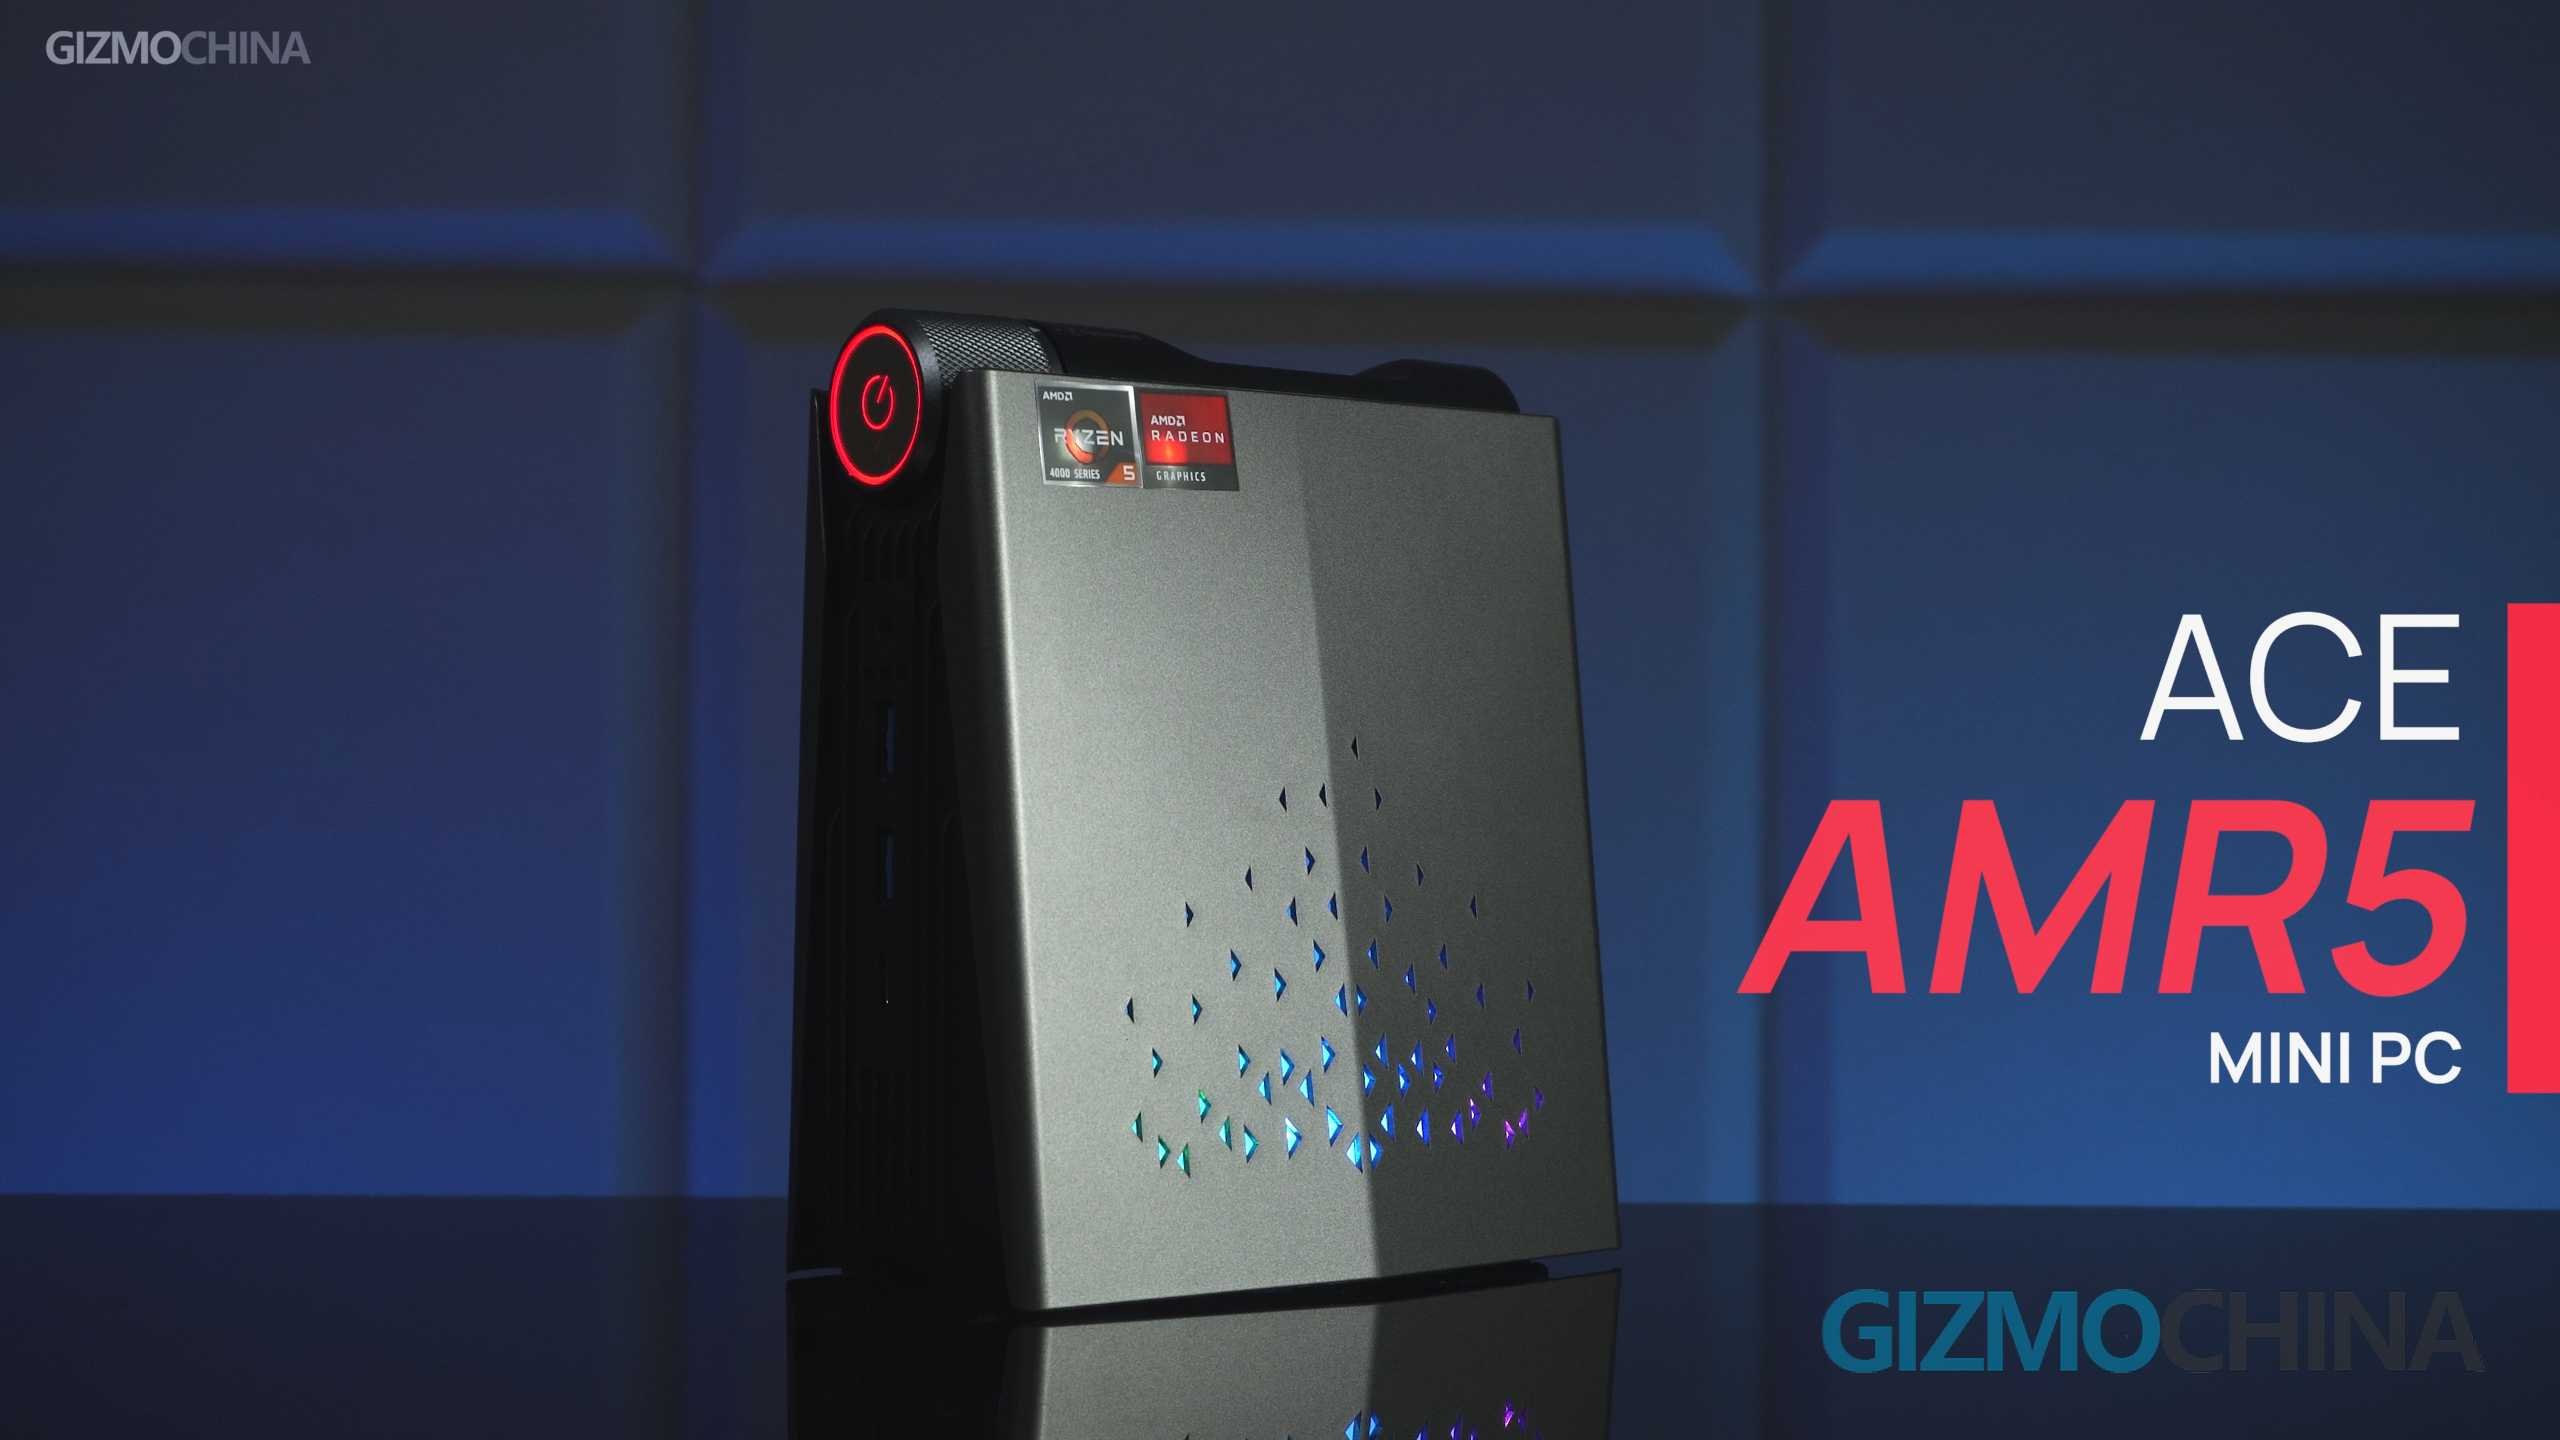 ACE AMR5 mini PC Review: Great expandability with 3 performance - Gizmochina